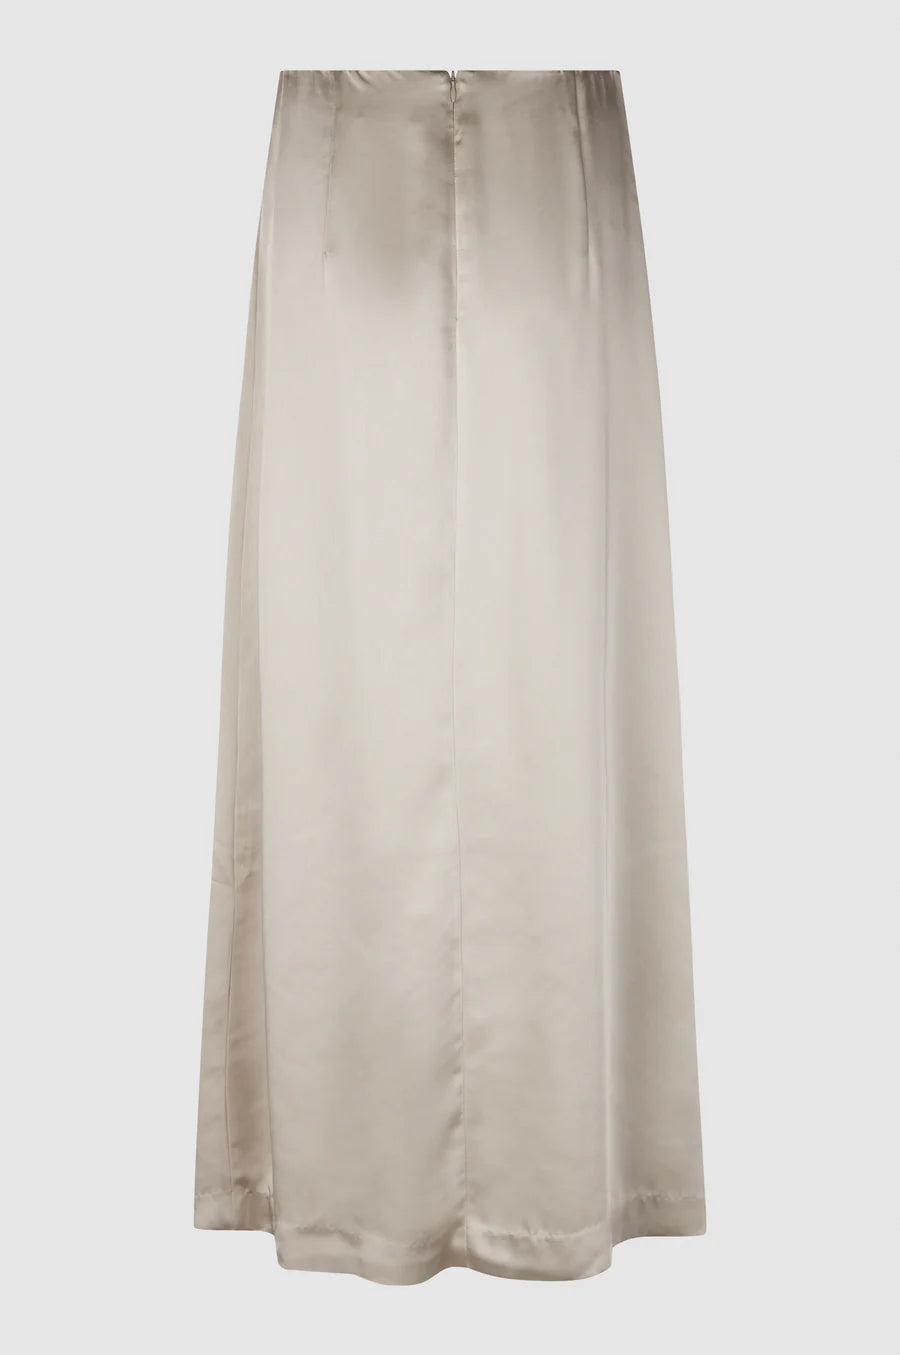 Champagne gold satin maxi A line skirt